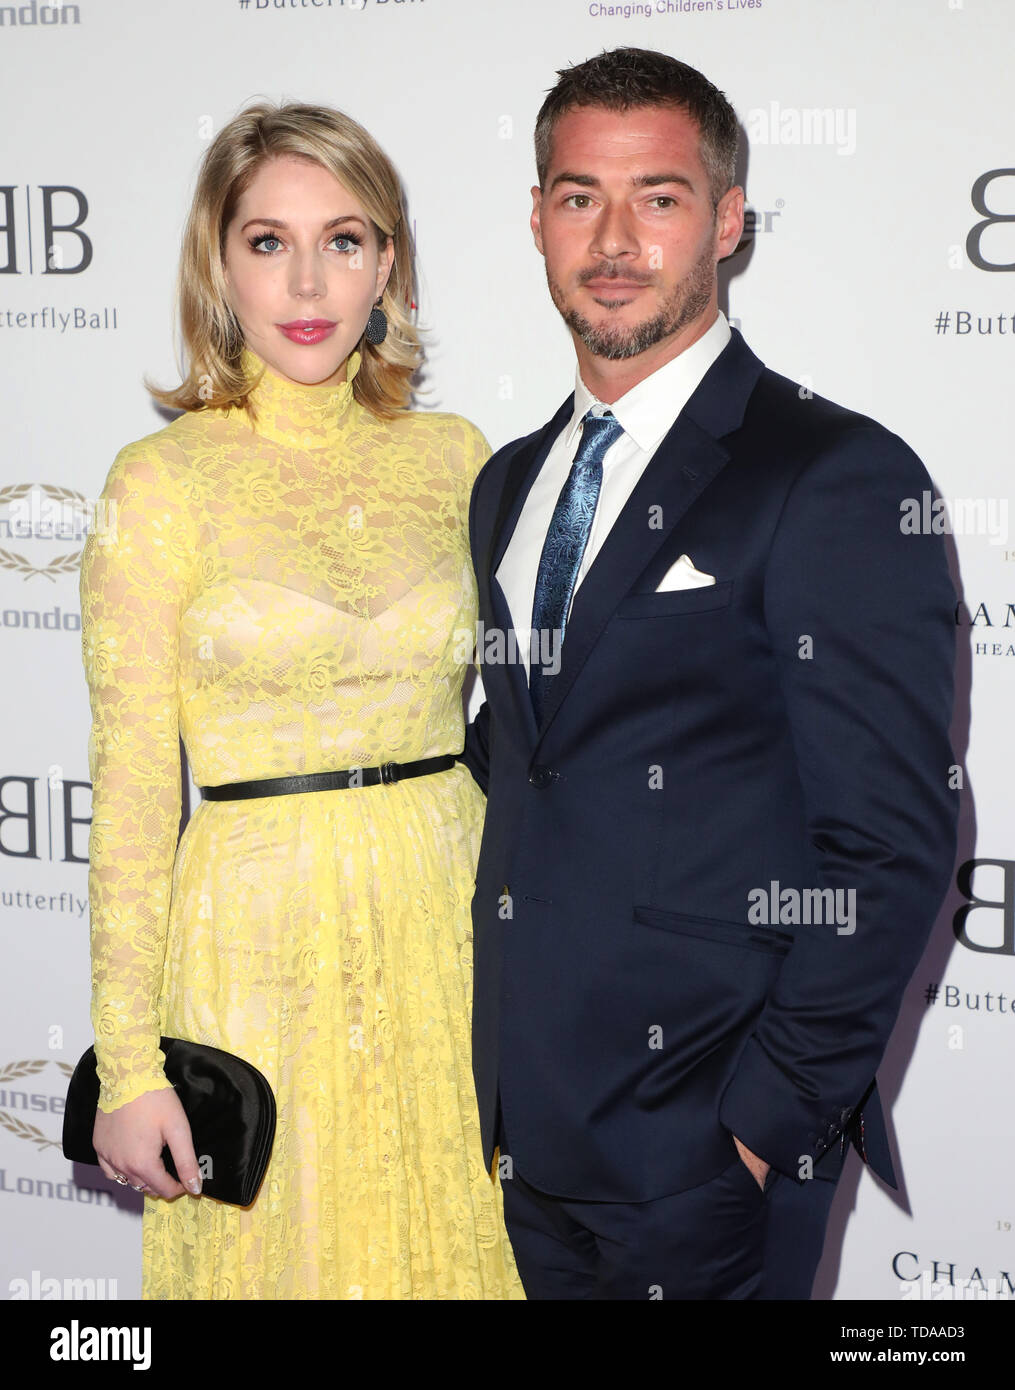 London, UK. 13th June, 2018. Katherine Ryan and guest attending the Butterfly Ball 2019 at Grosvenor House in London Credit: SOPA Images Limited/Alamy Live News Stock Photo